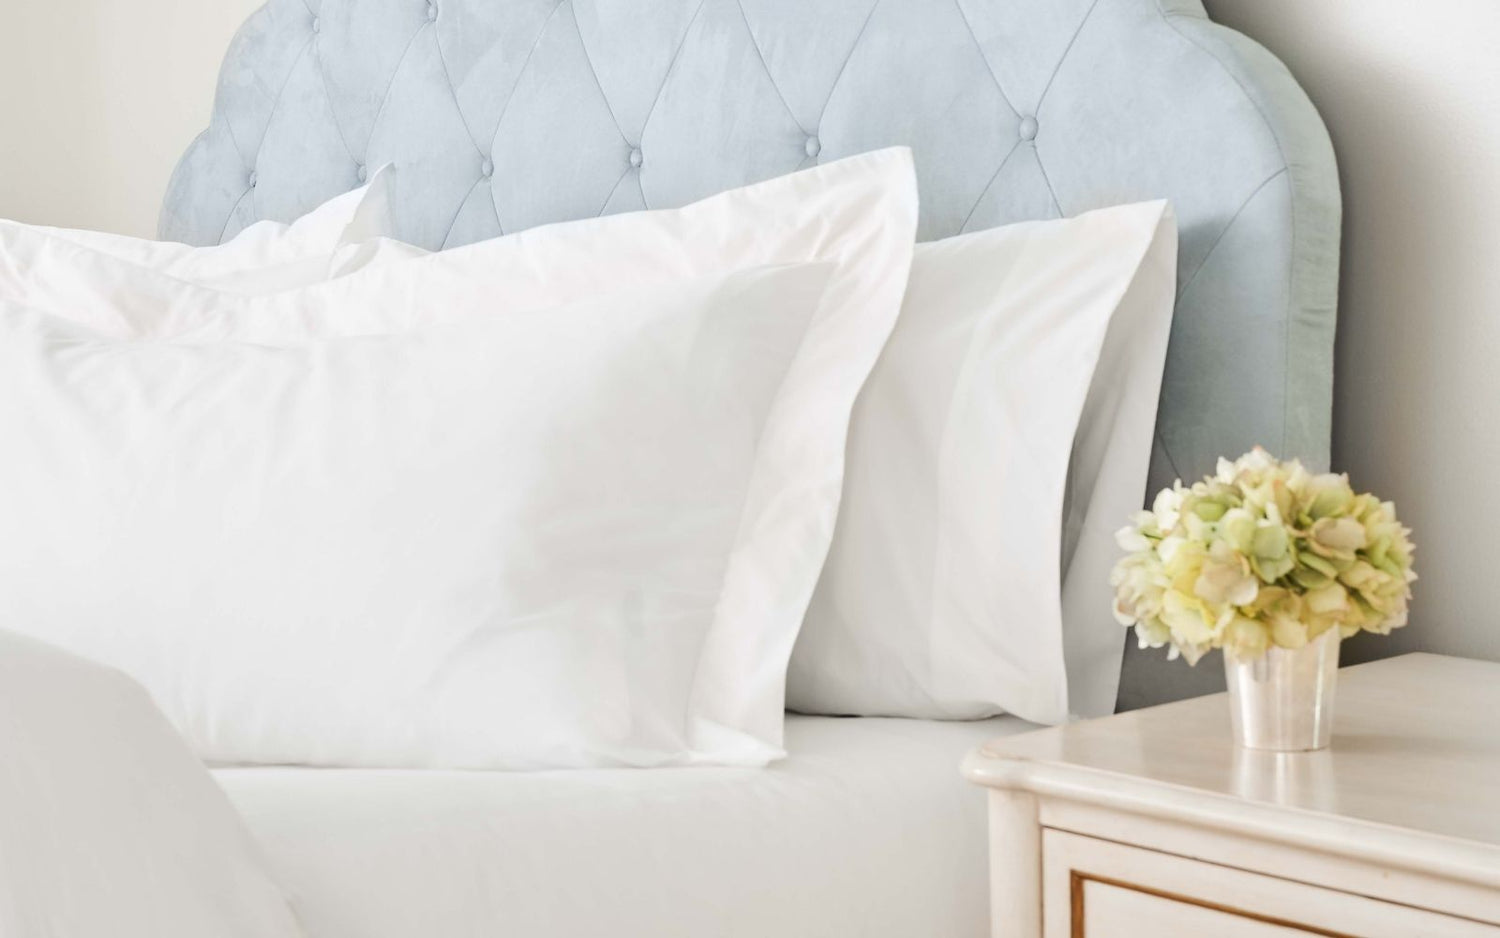 Thomas Lee Sheets, is pleased to extend its hospitality program to include Airbnbs and VRBOs. Top Superhosts and Premier hosts know Thomas Lee's beautiful bedding gets softer with every wash and is sure to delight even the most discerning guests.